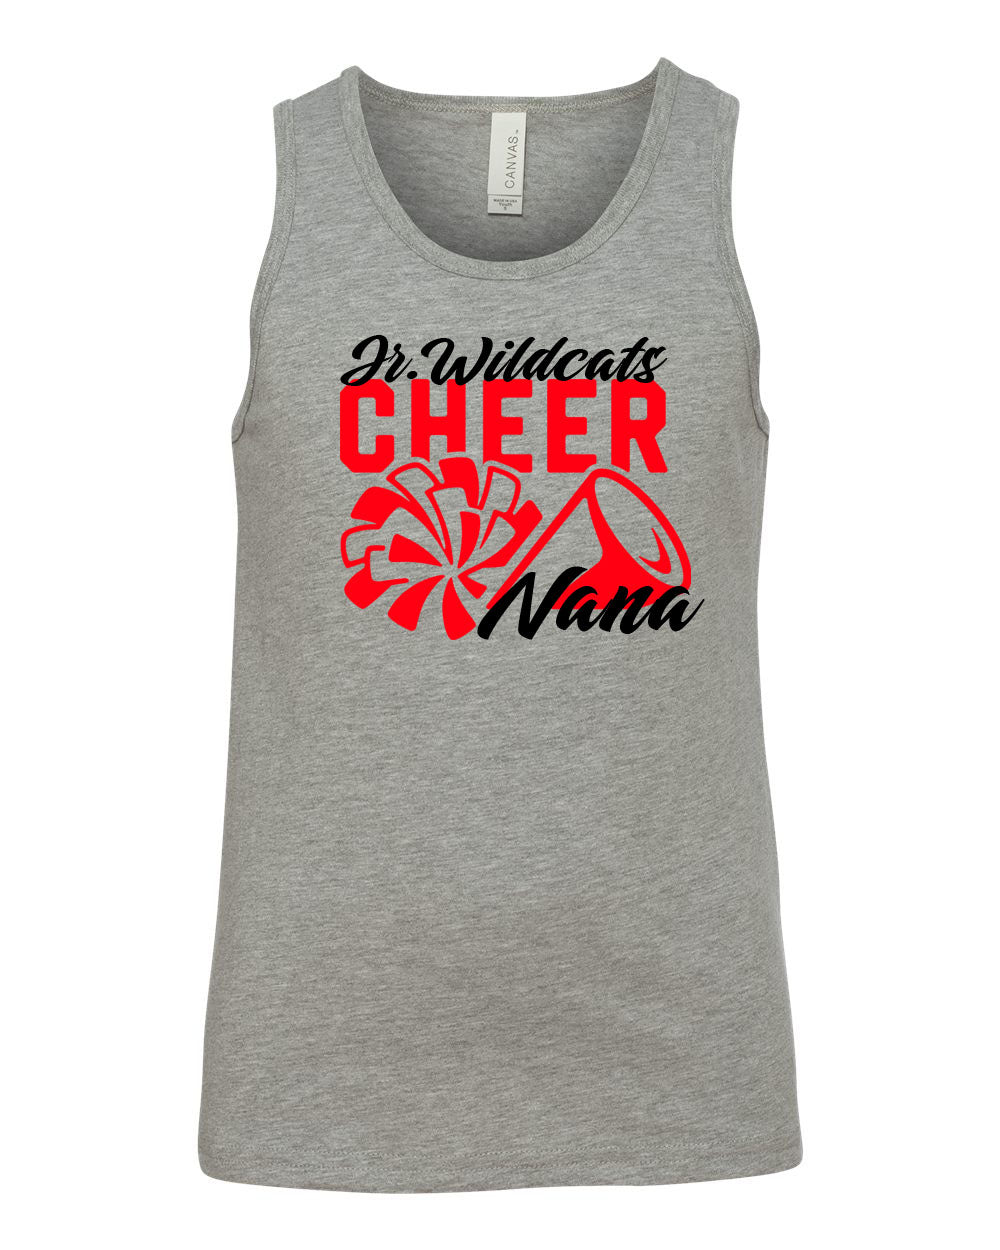 High Point Cheer design 4 Ladies Muscle Tank Top